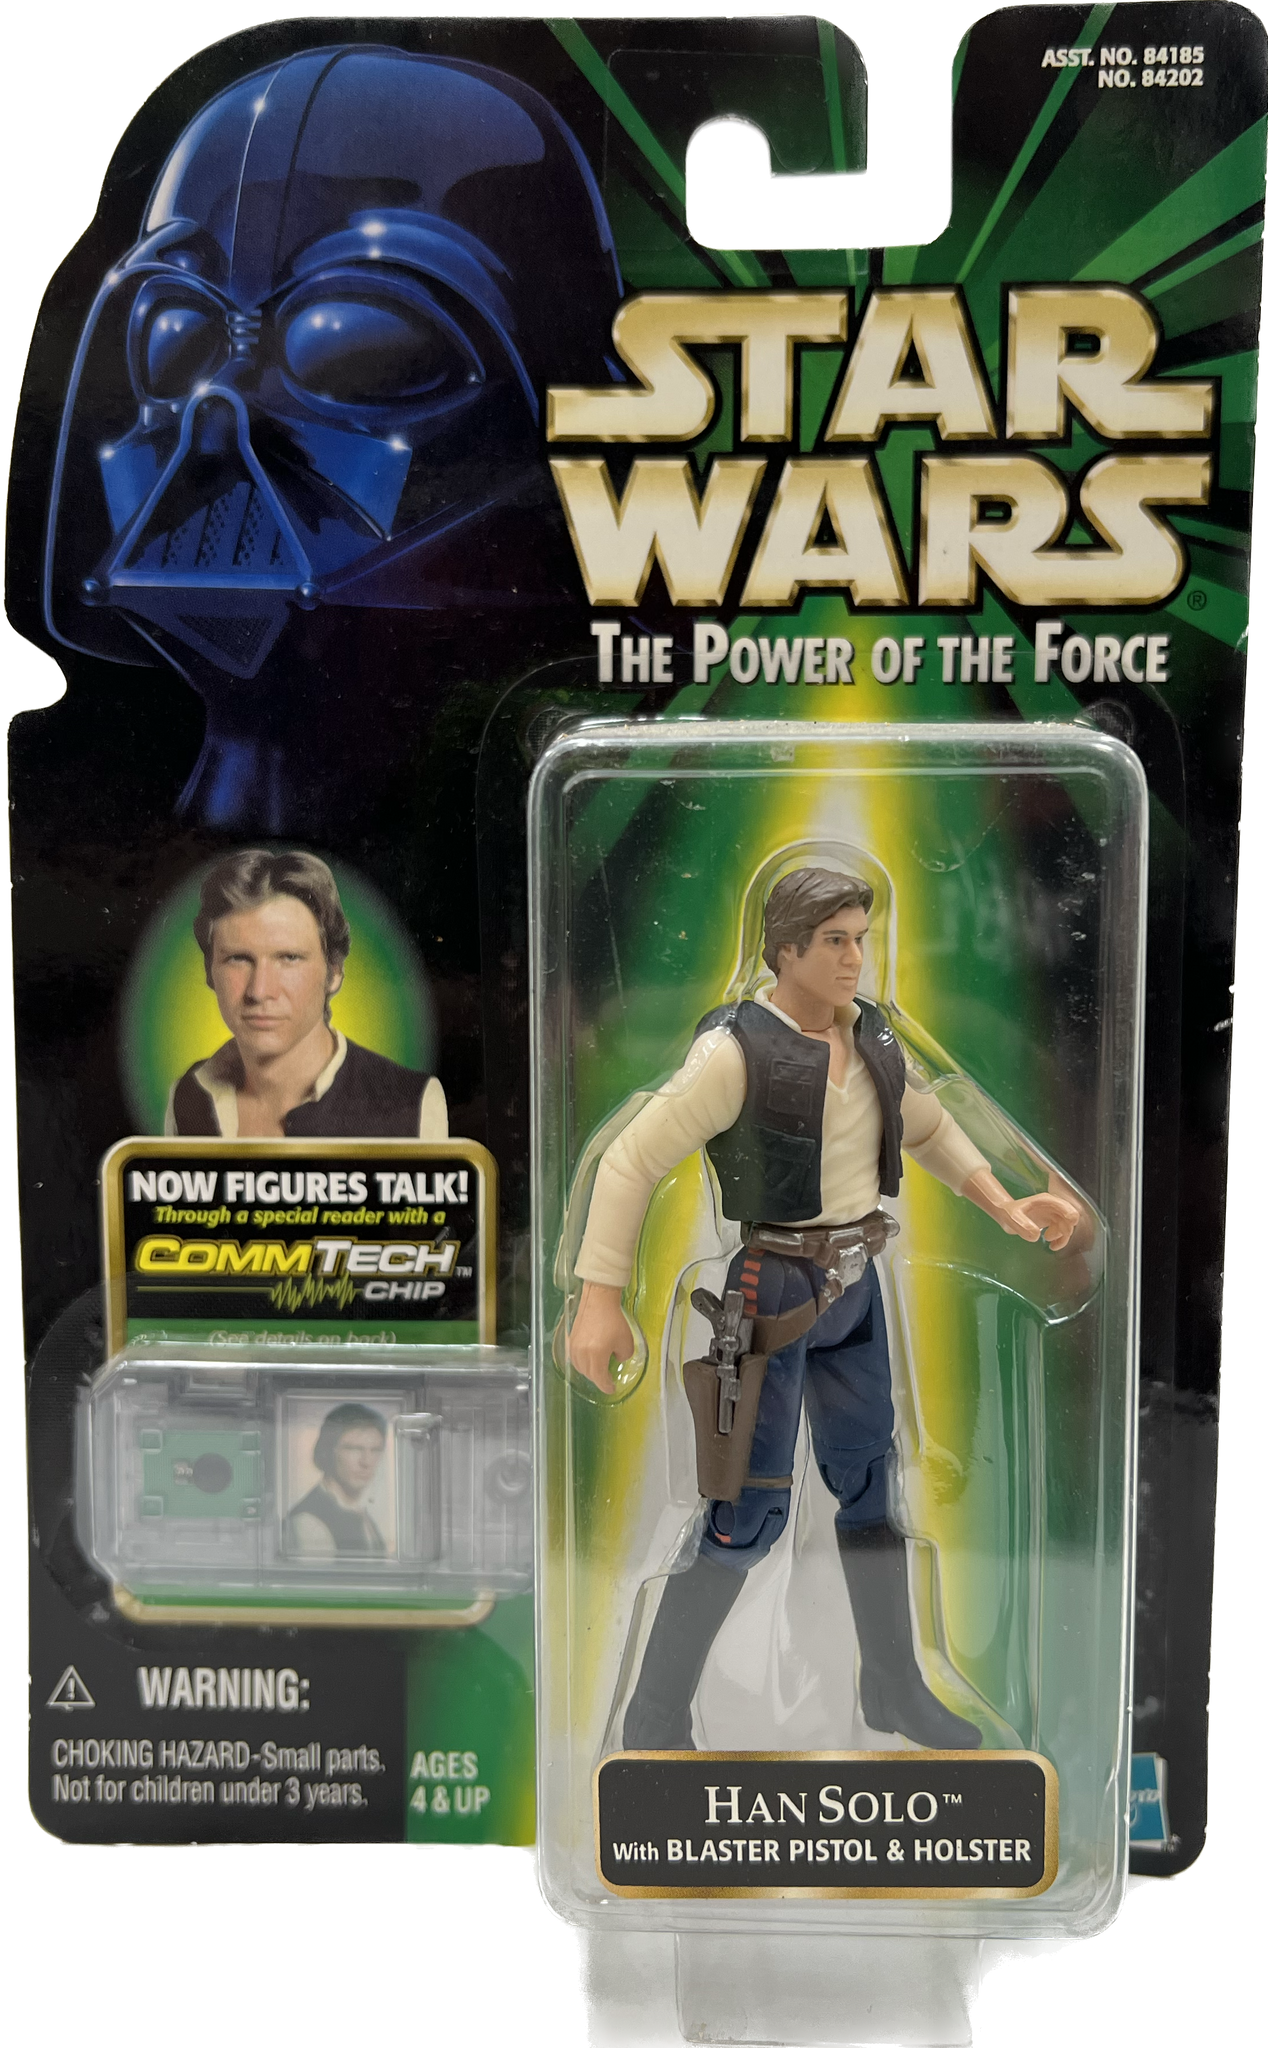 Star Wars Power of the Force Commtech Chip Han Solo